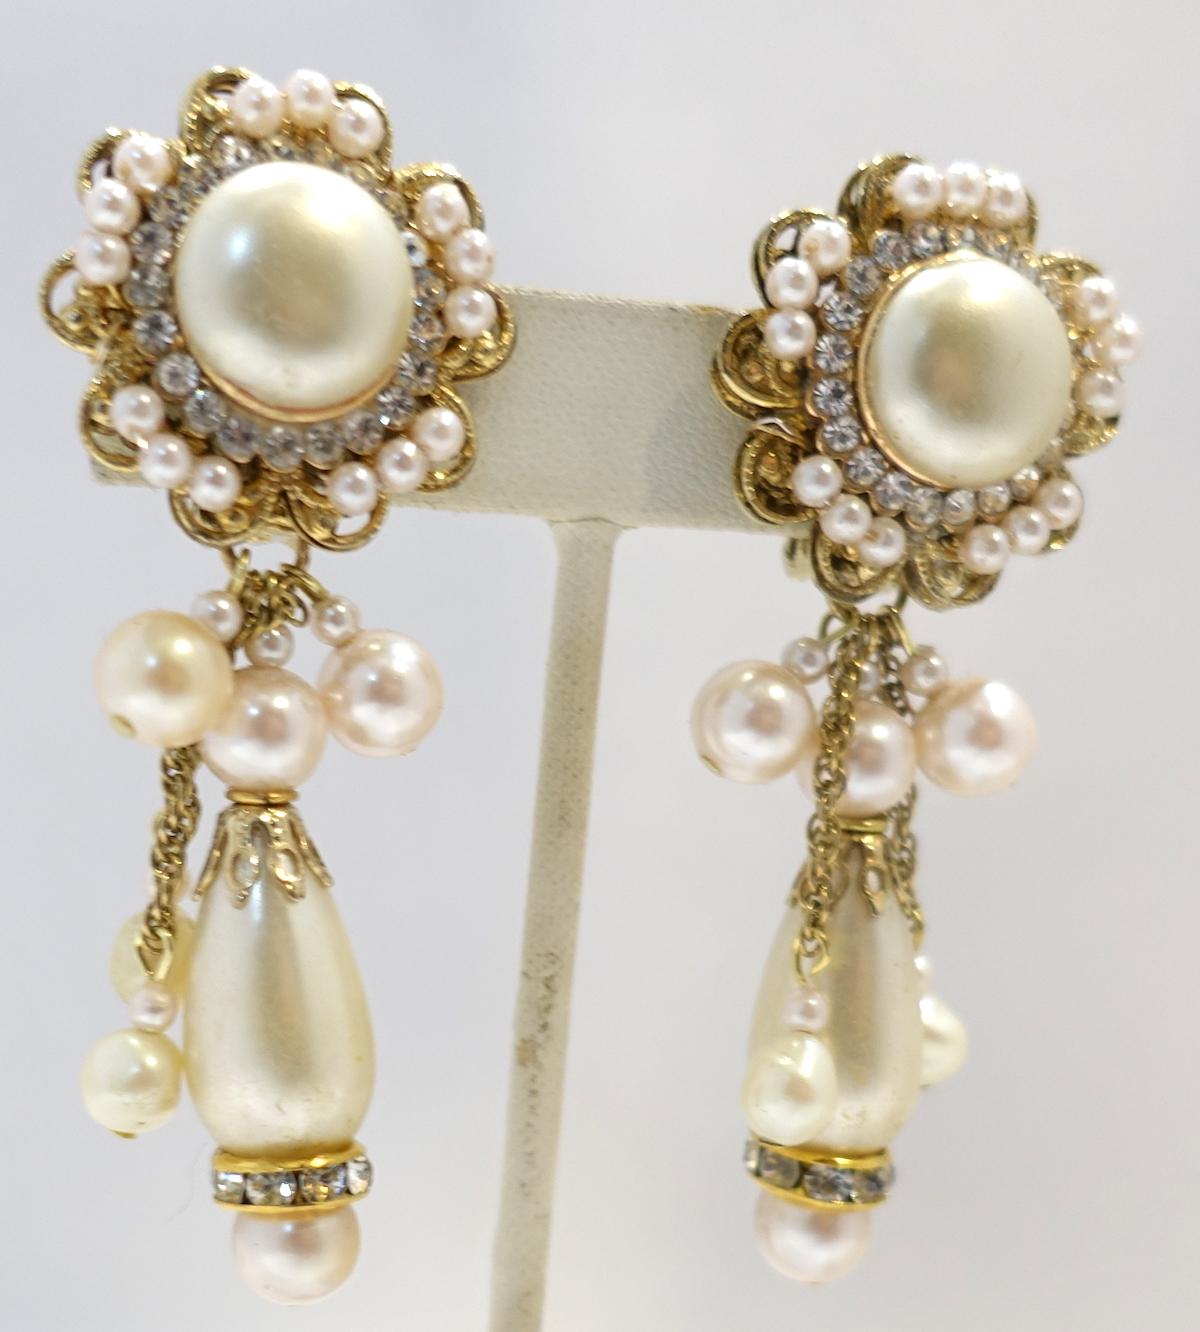 These vintage signed DeMario earrings has a faux pearl top with crystal accents. A large faux pearl hangs down with a gold tone cap and faux pearls above. In excellent condition, these clip earrings measure 3” x 1” and are signed “DeMario”.